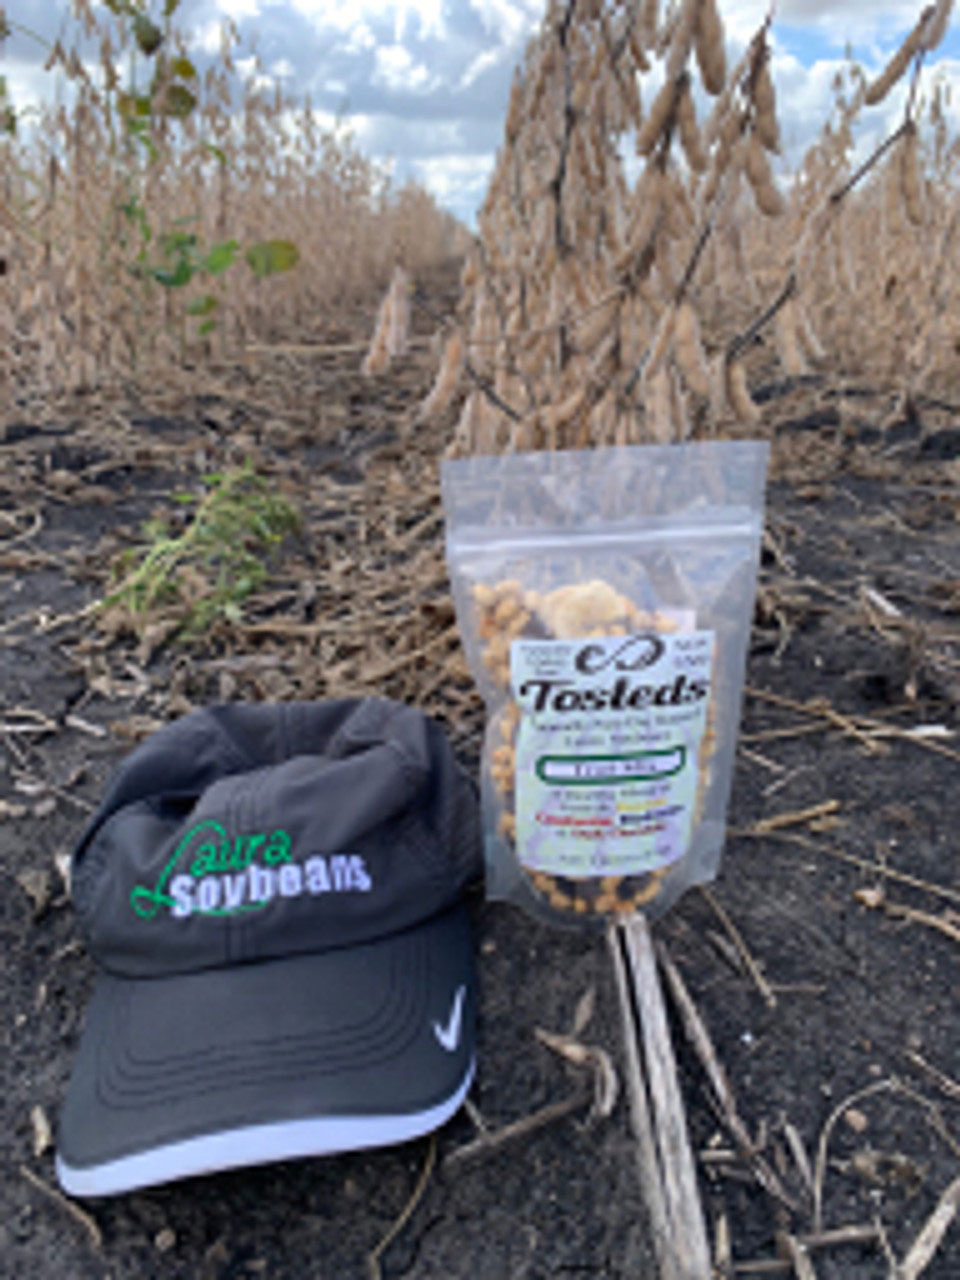 A Laura Soybeans hat next to a resealable bag of Tosteds Trail Mix, sitting in the Laura Soybeans field.